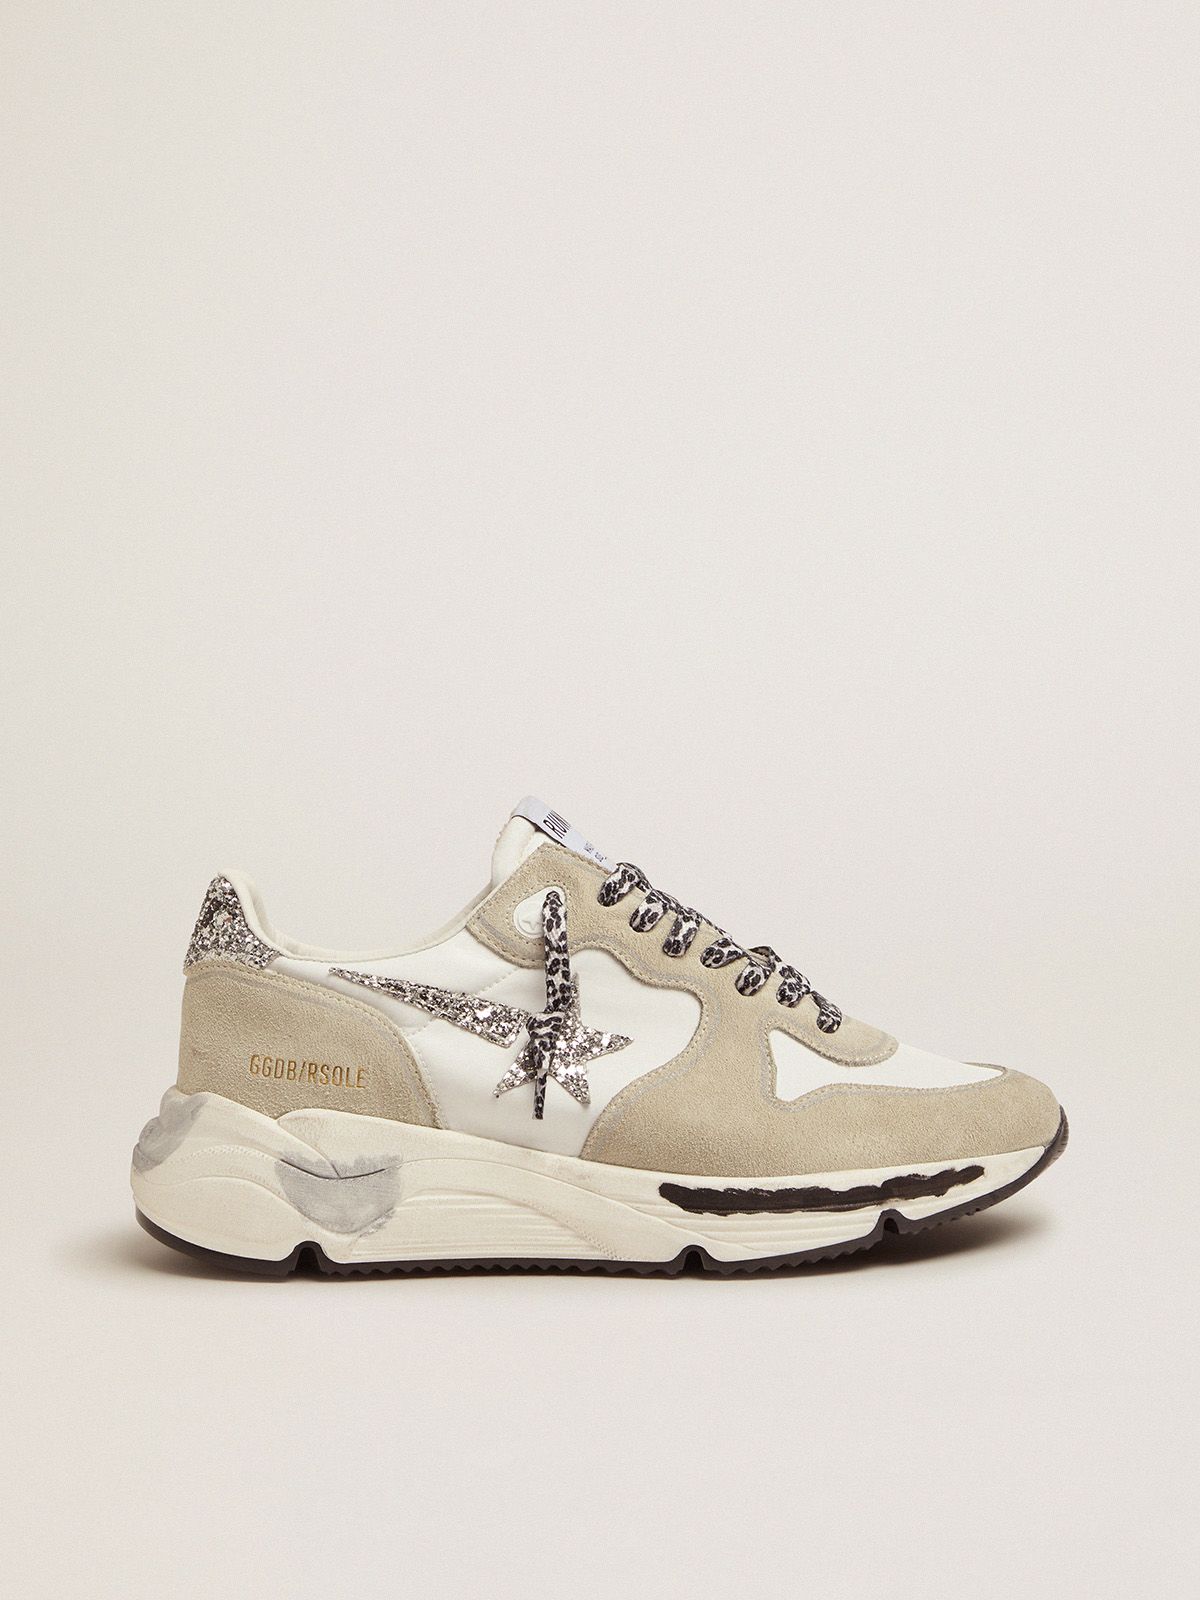 golden goose and suede in with glitter Golden Running star Sole nylon